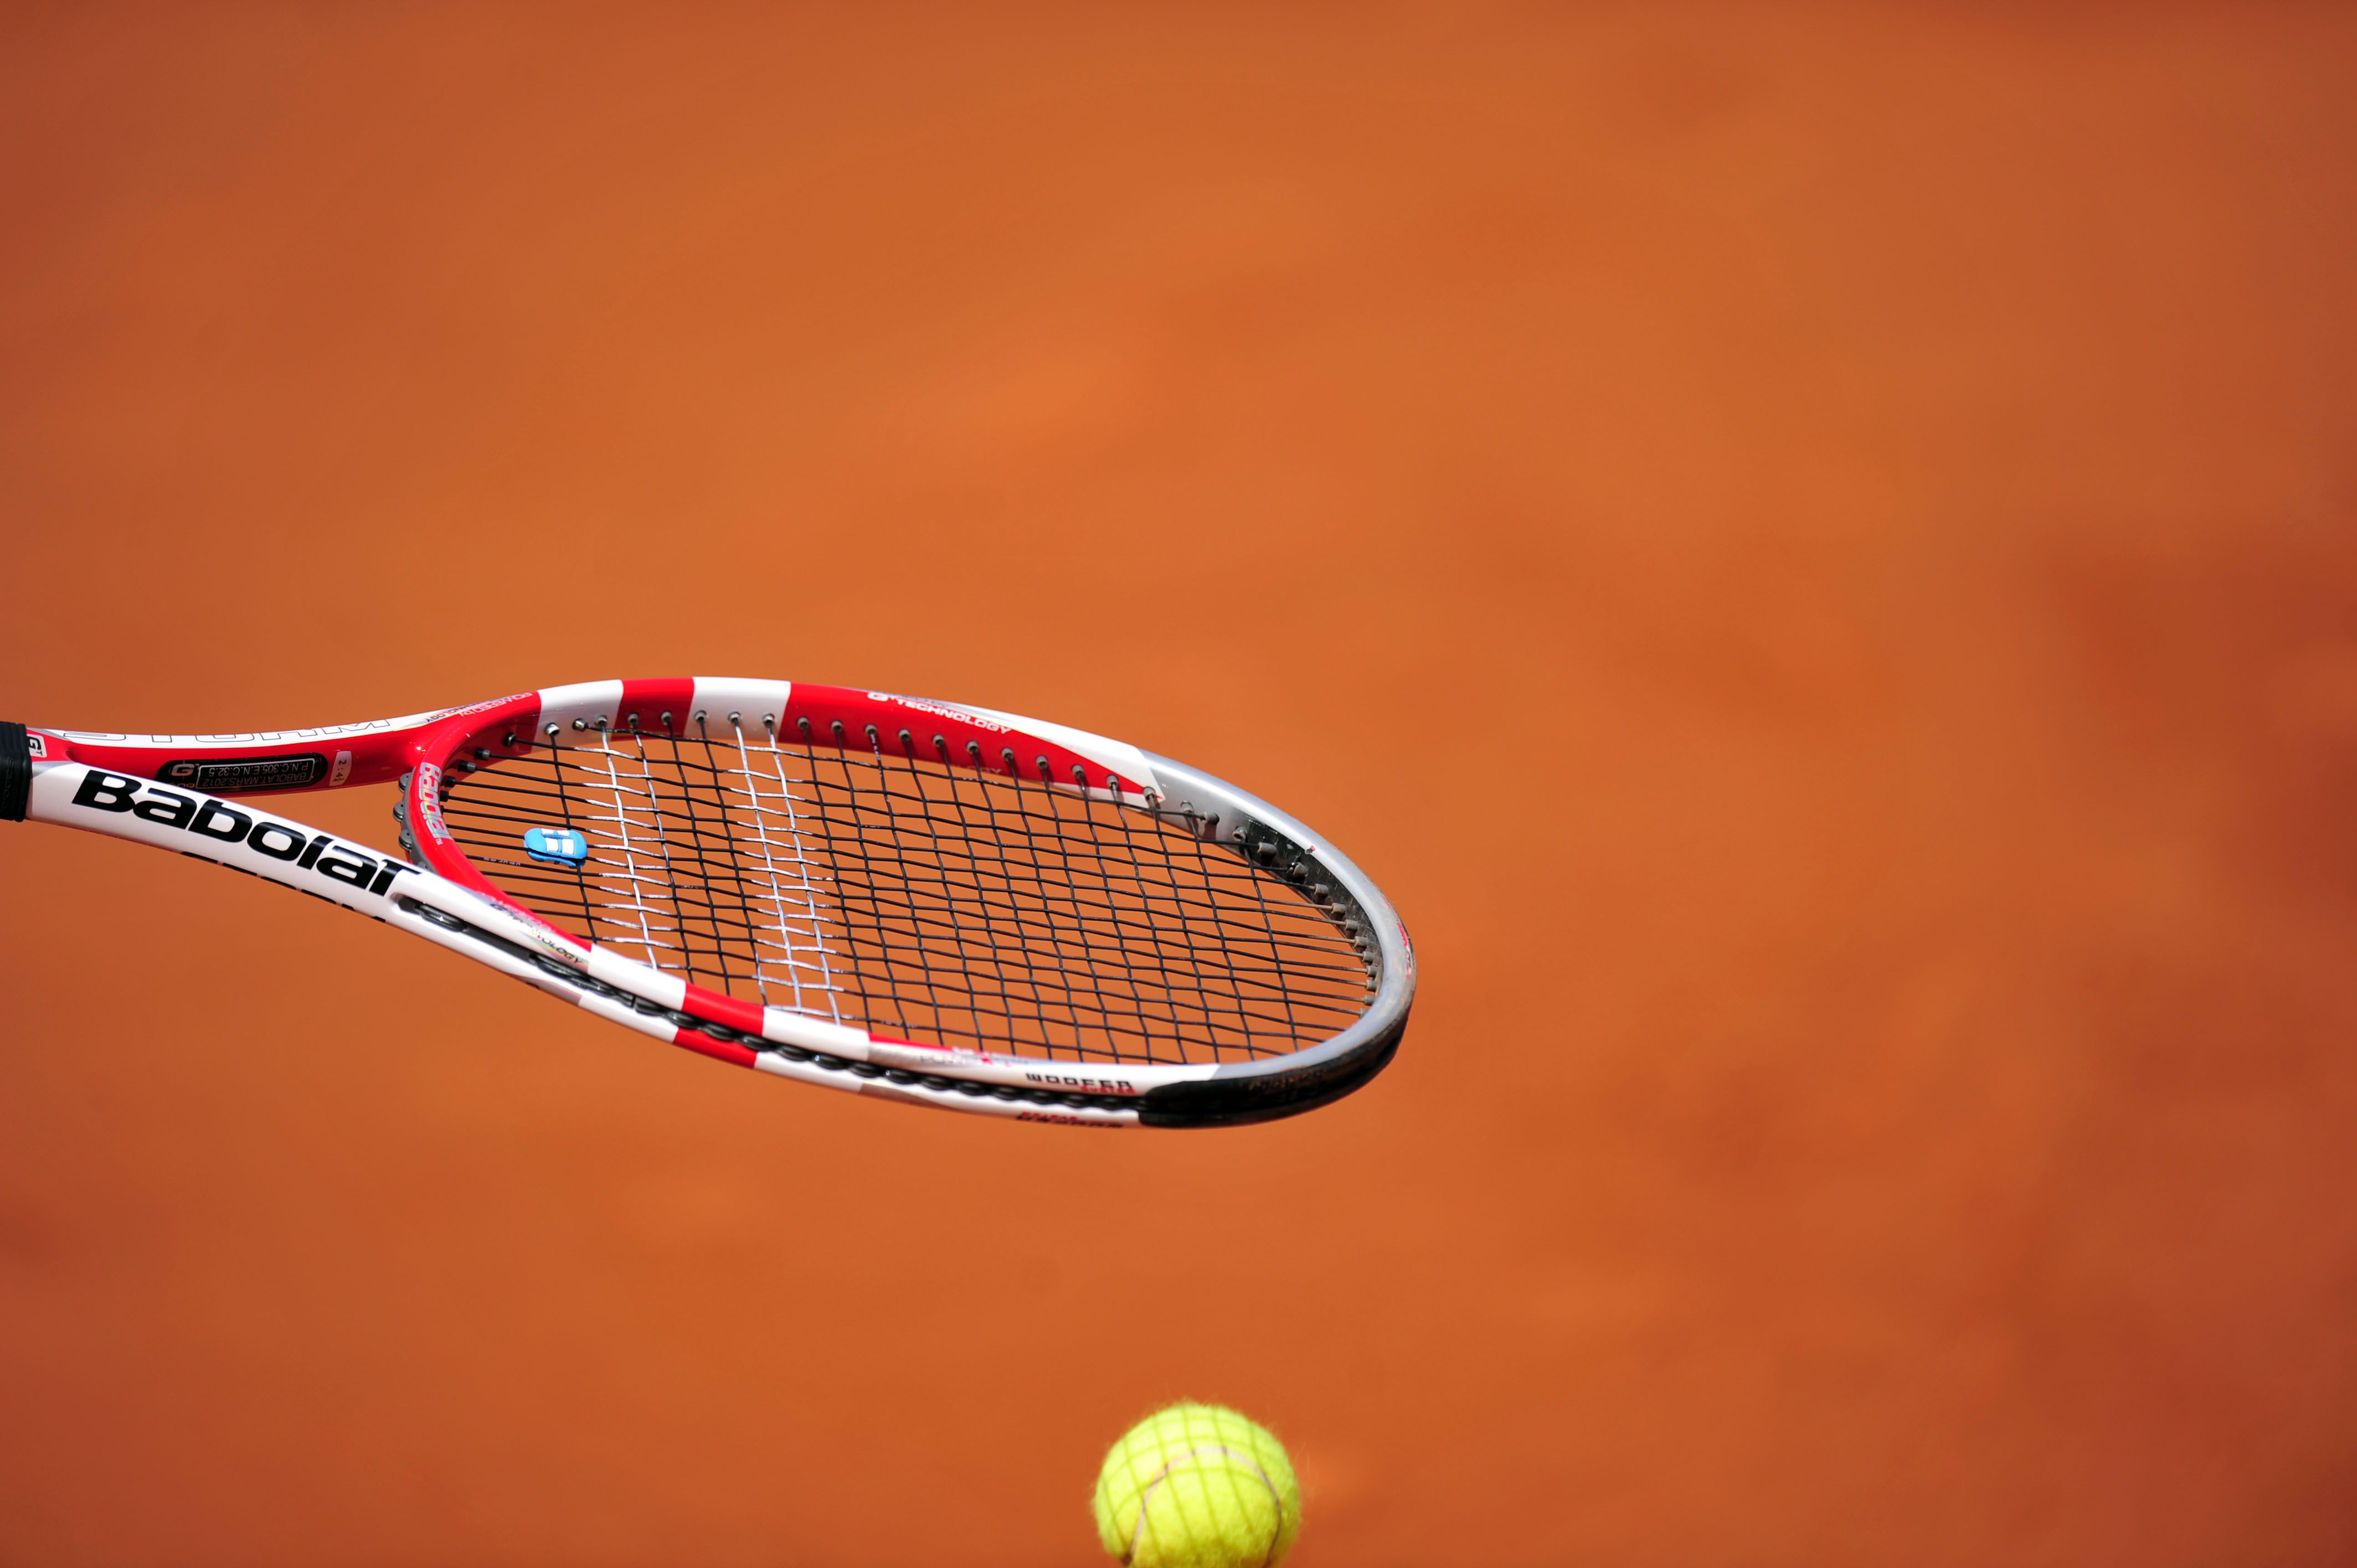 French Open Tennis Grand Slam - Roland Garros: By the numbers